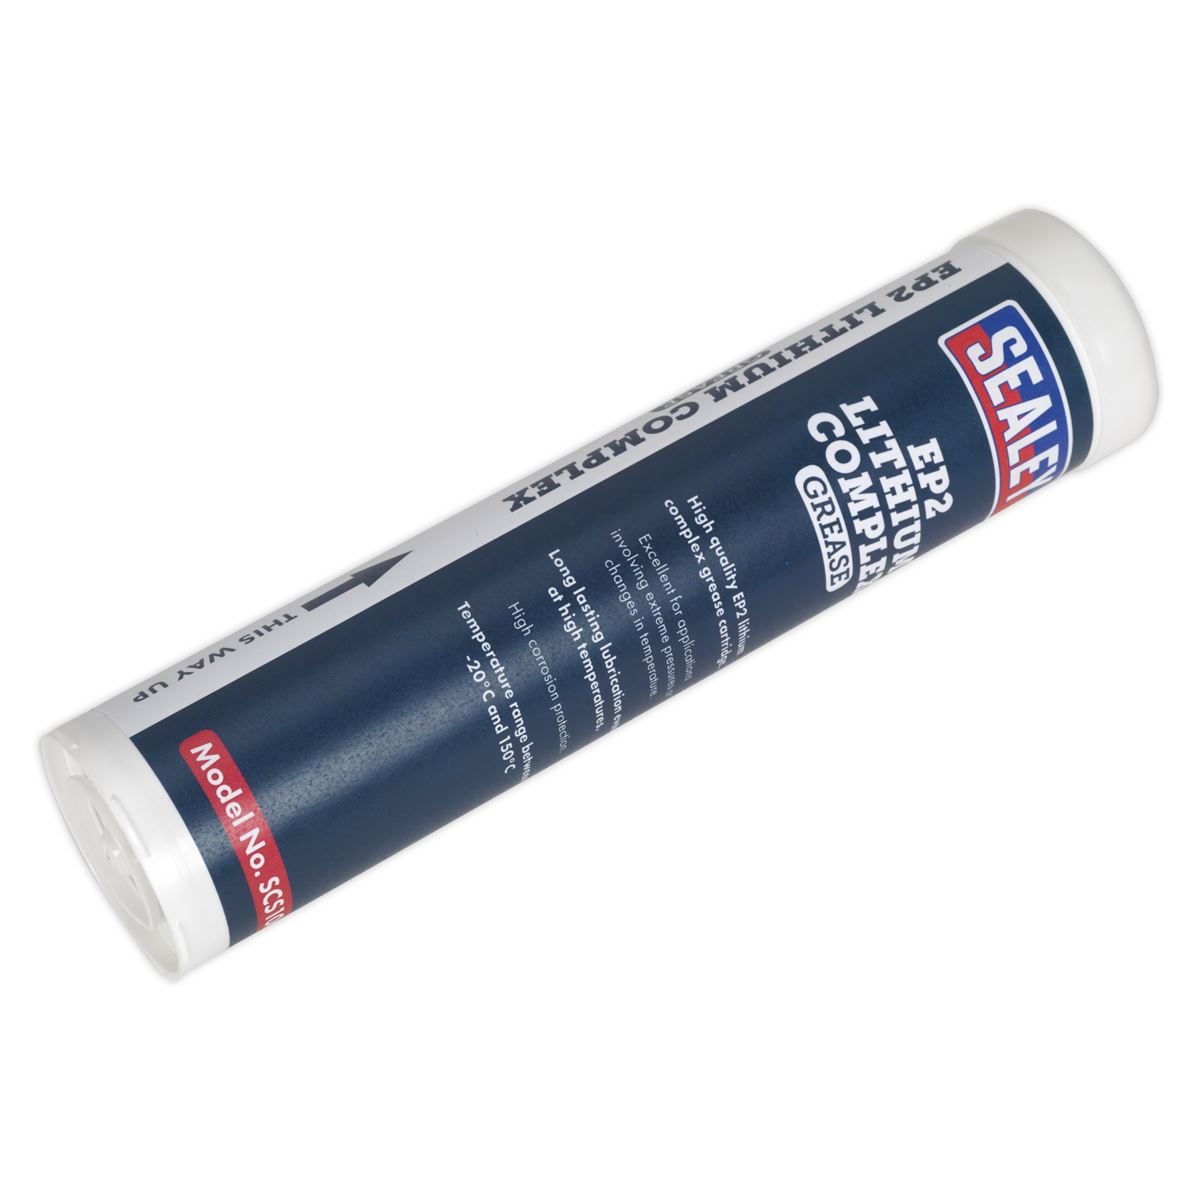 Sealey EP2 Lithium Complex Grease Cartridge 400g